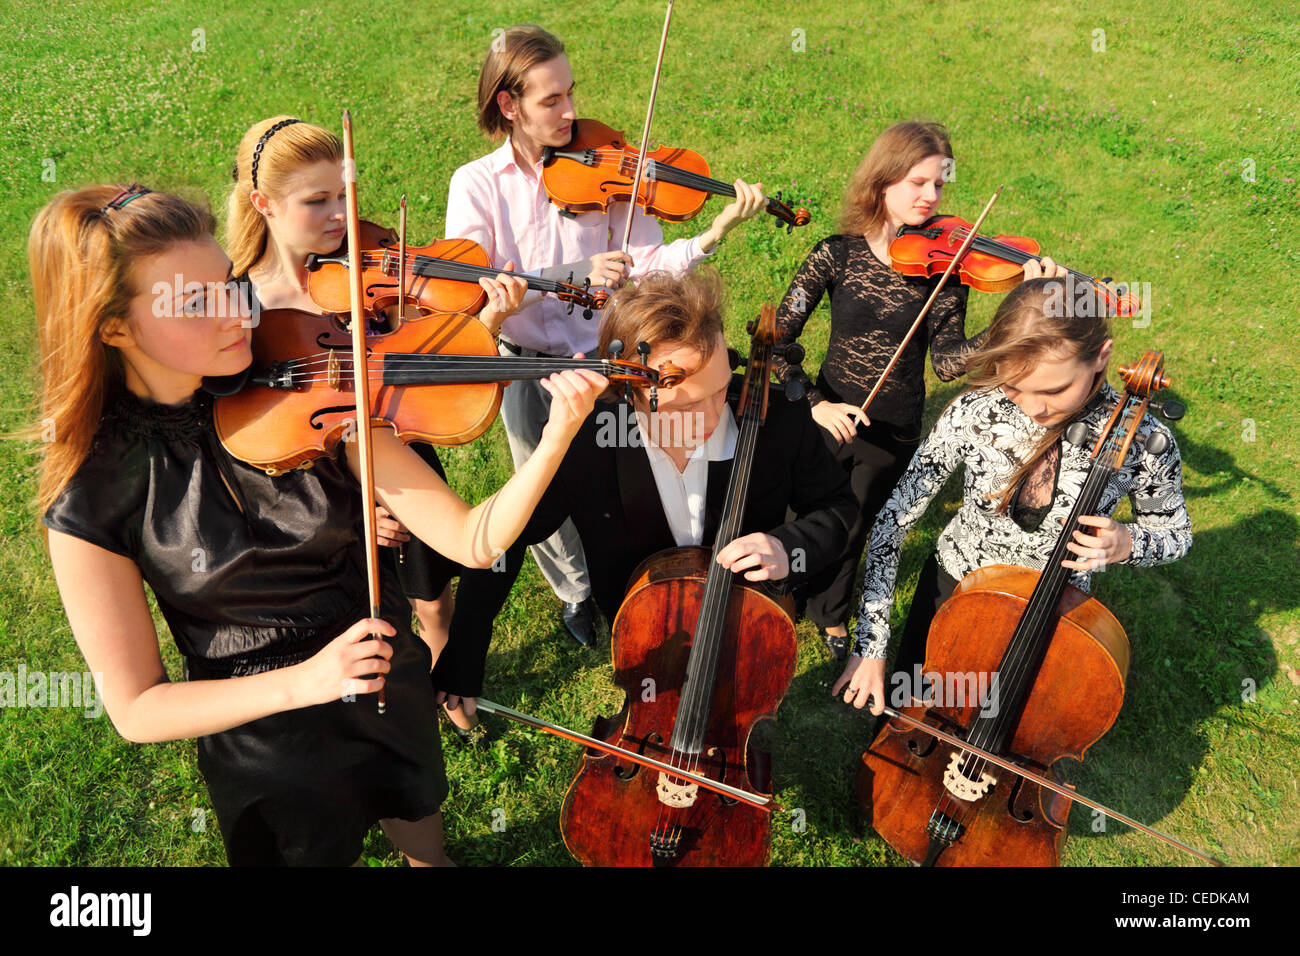 Group of violinists play standing on grass Stock Photo